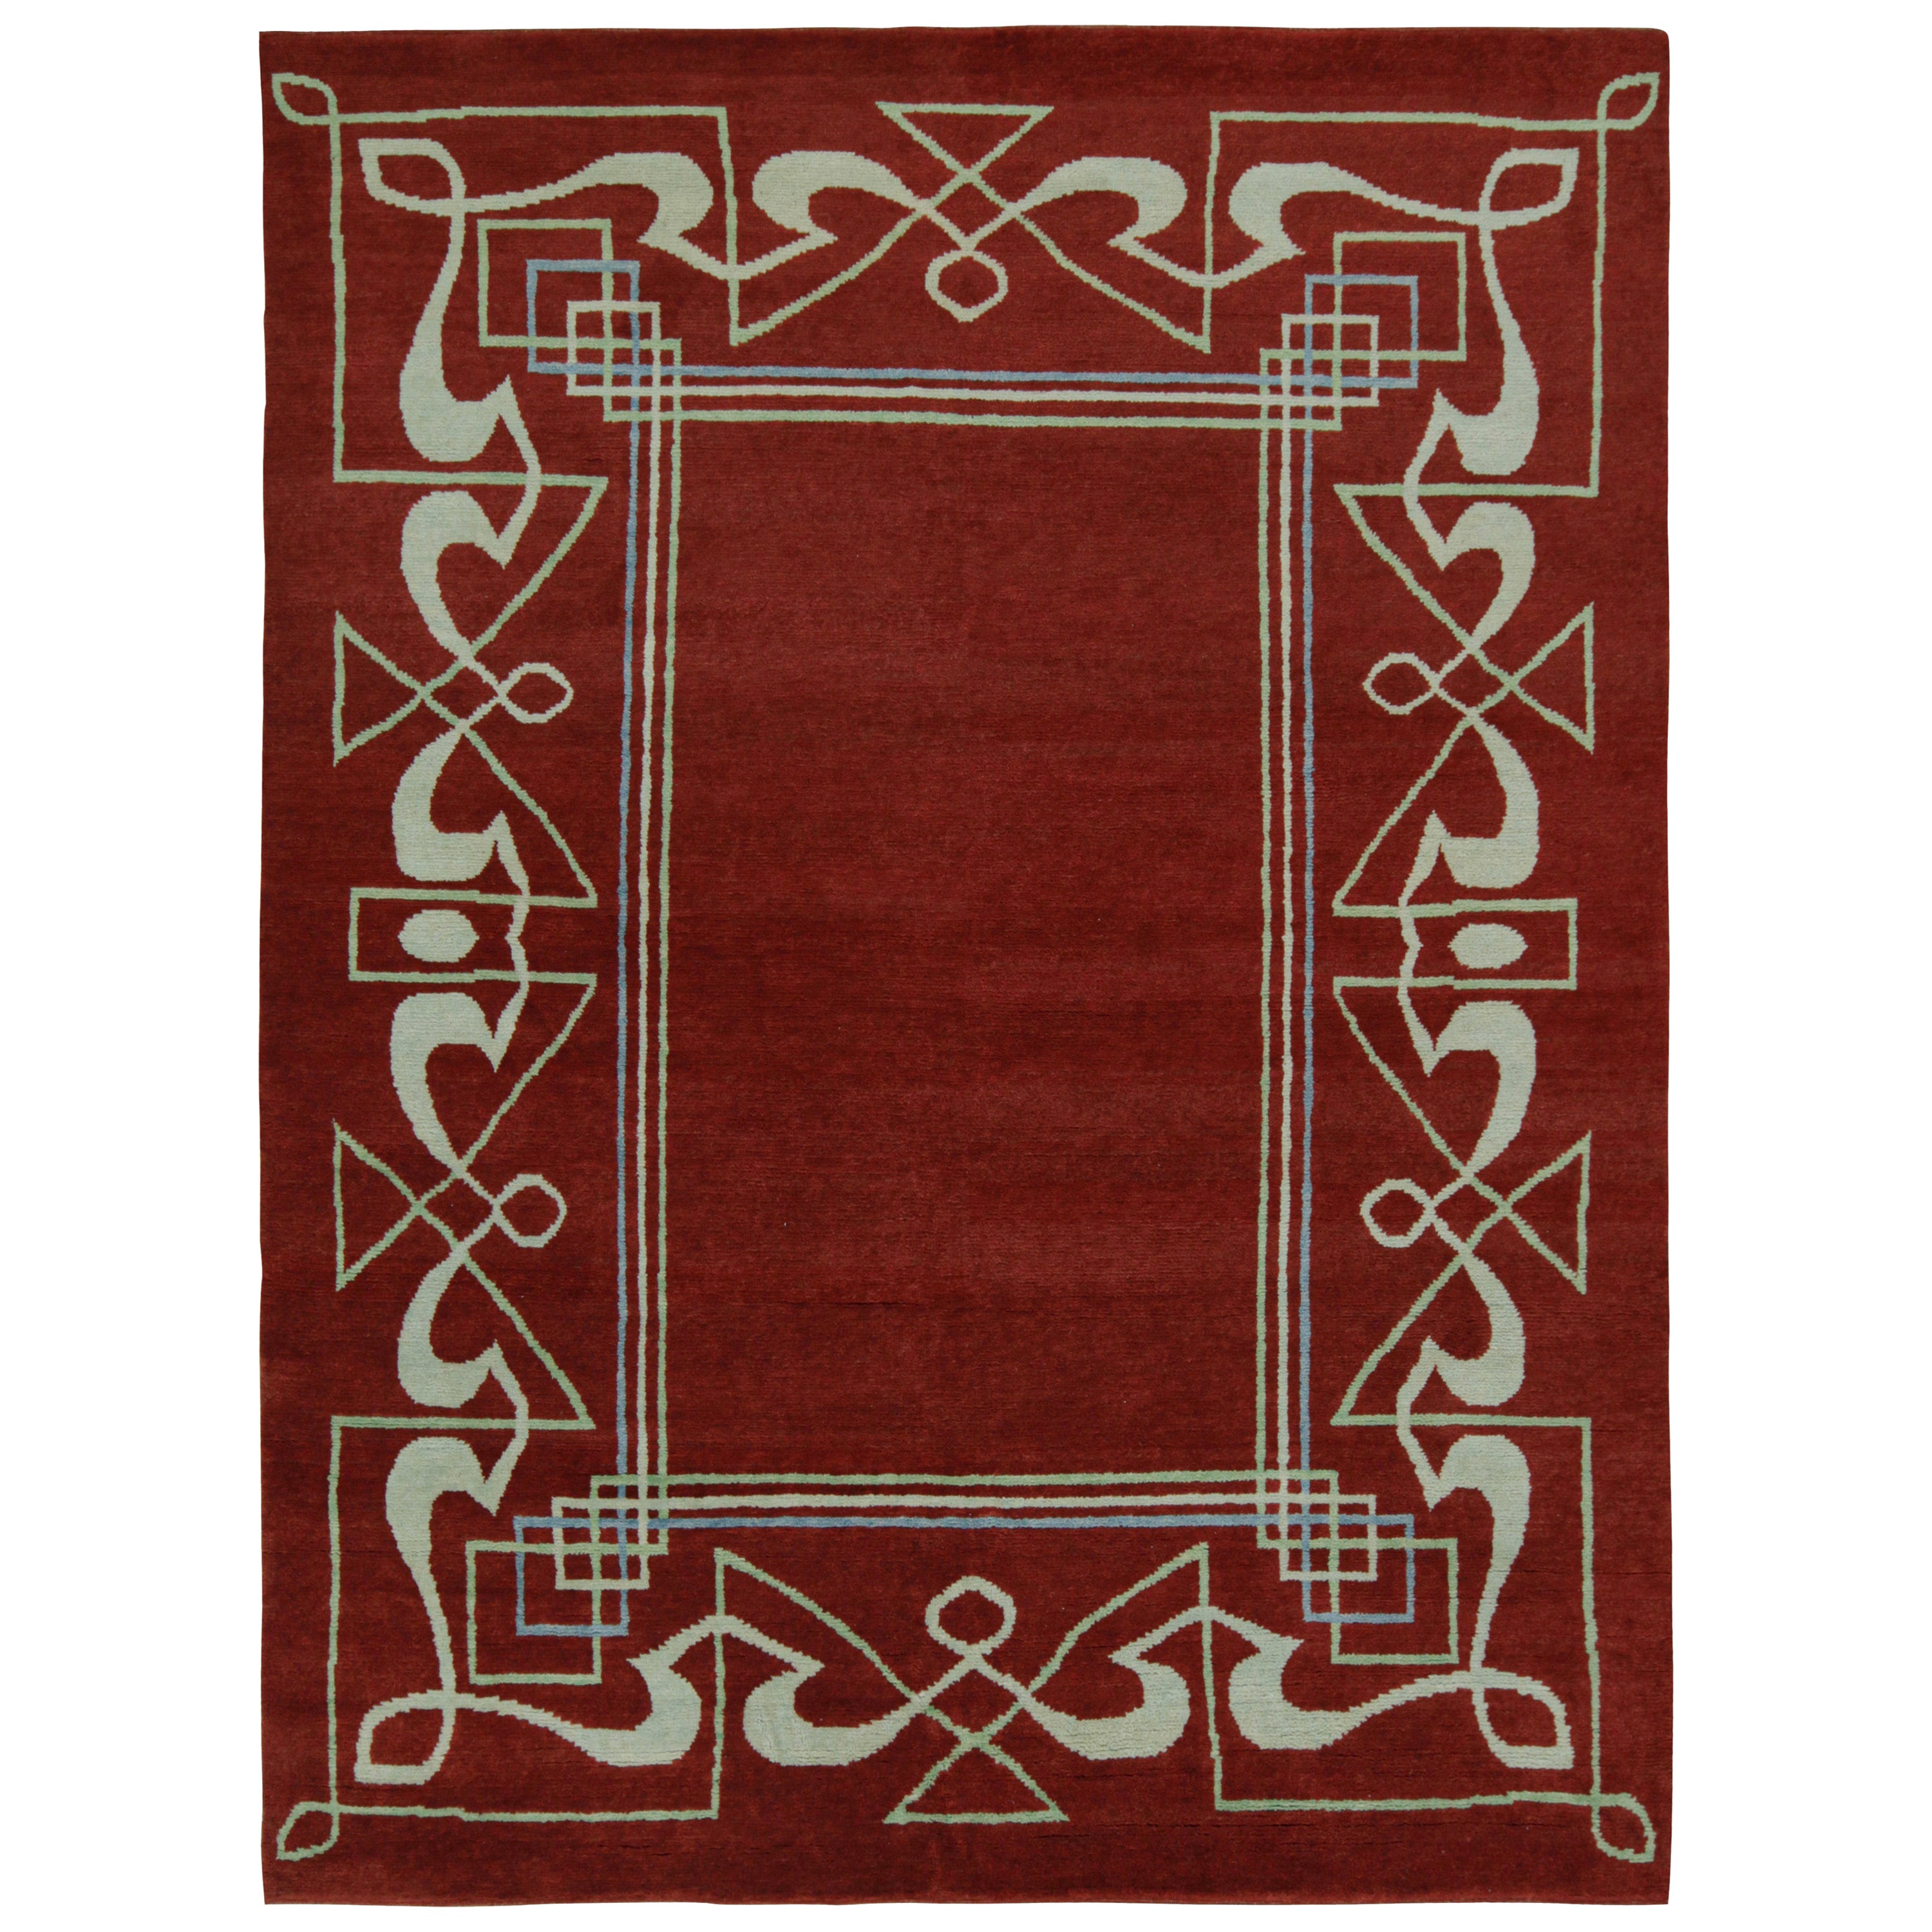 Rug & Kilim’s French Style Art Deco Rug in Red & White Geometric Patterns